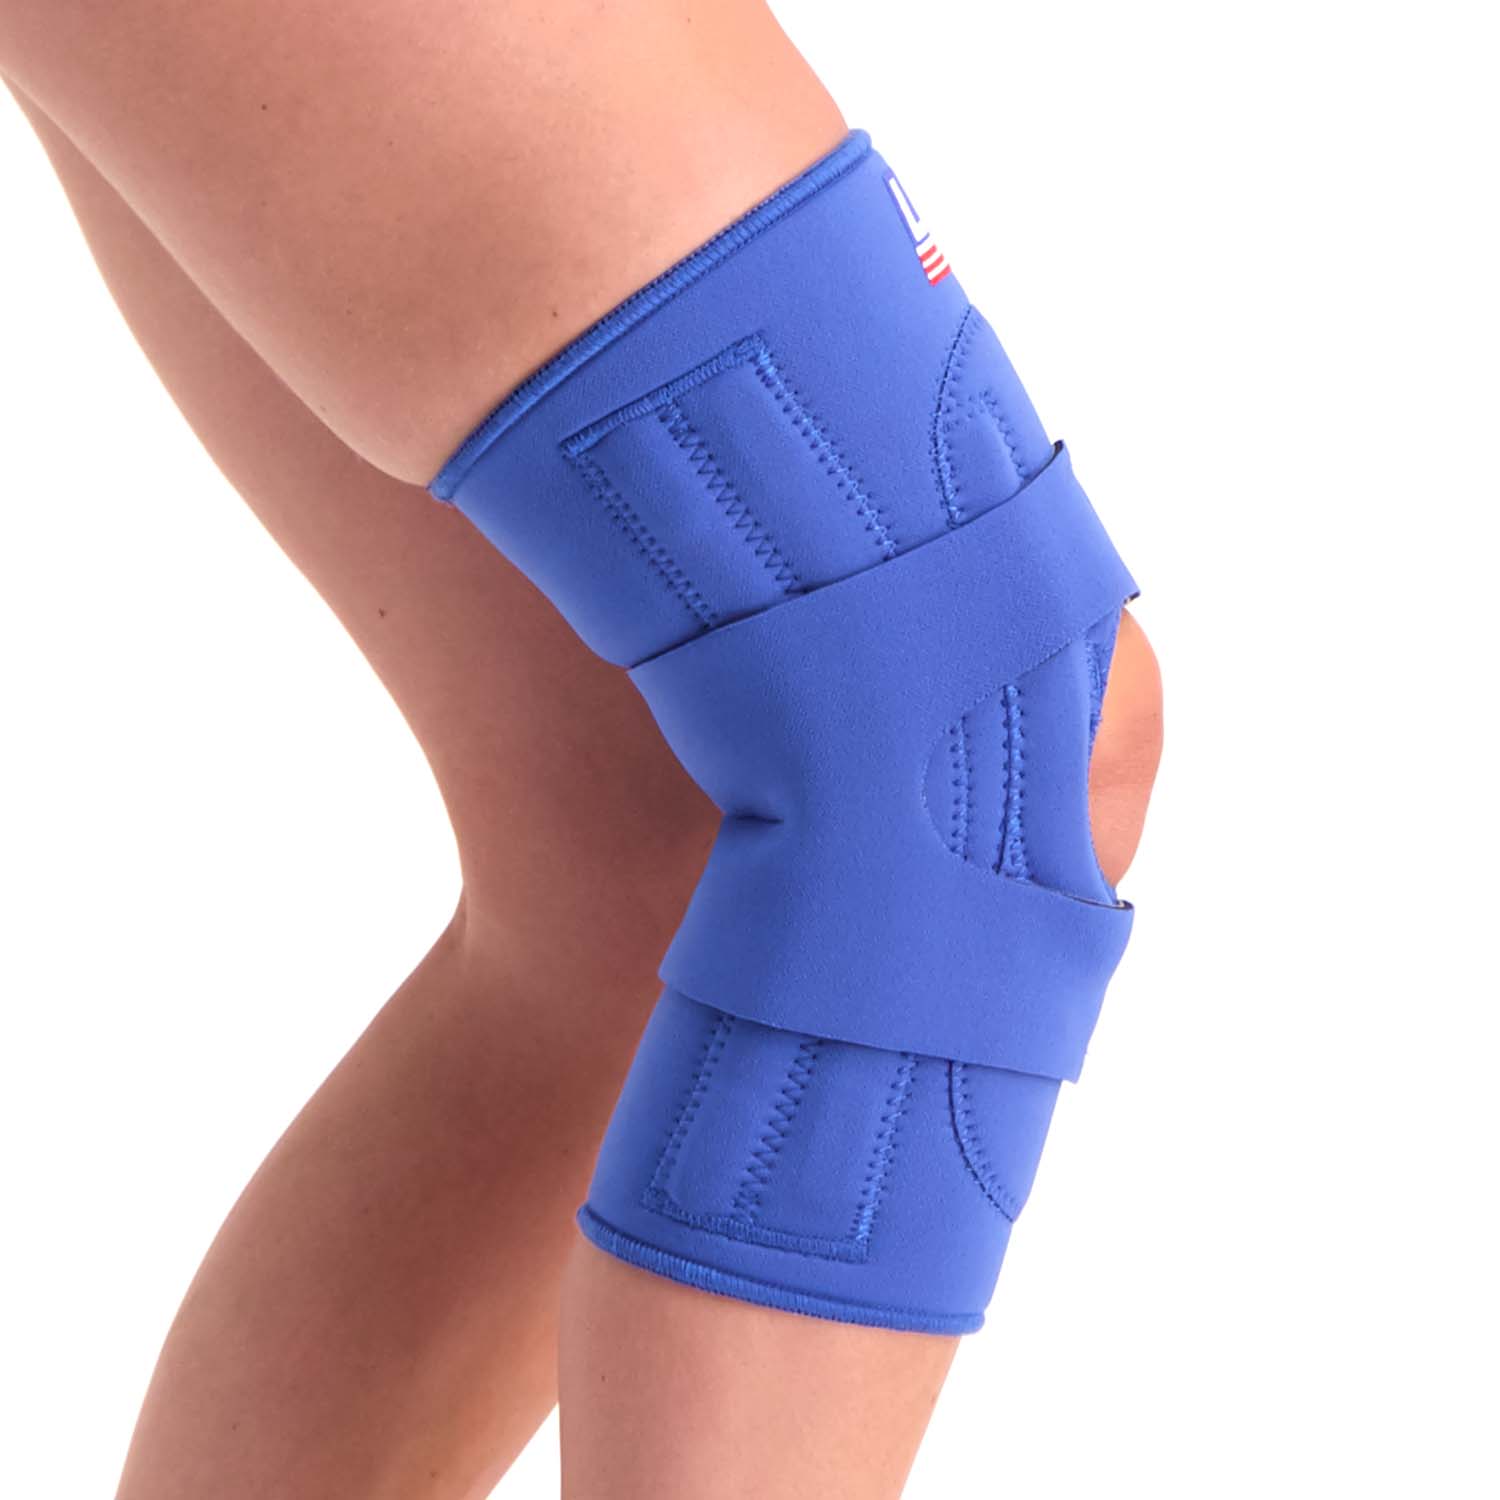 LP Support 721 Knee support side view